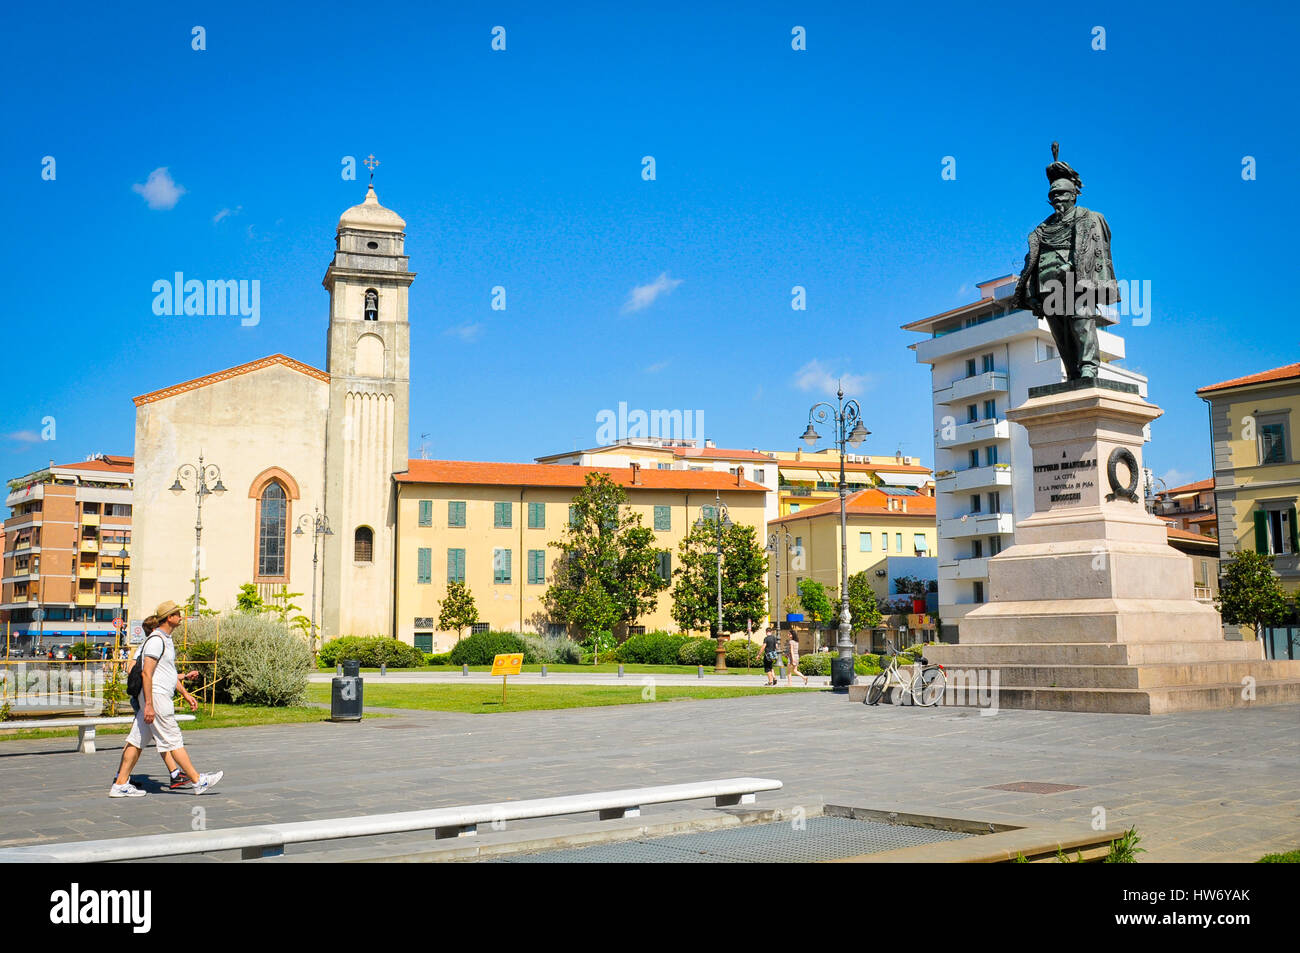 Pisa, Italy - June 25, 2016: Tourists visit the old town in Pisa, Italy reknown for its leaning tower. Stock Photo